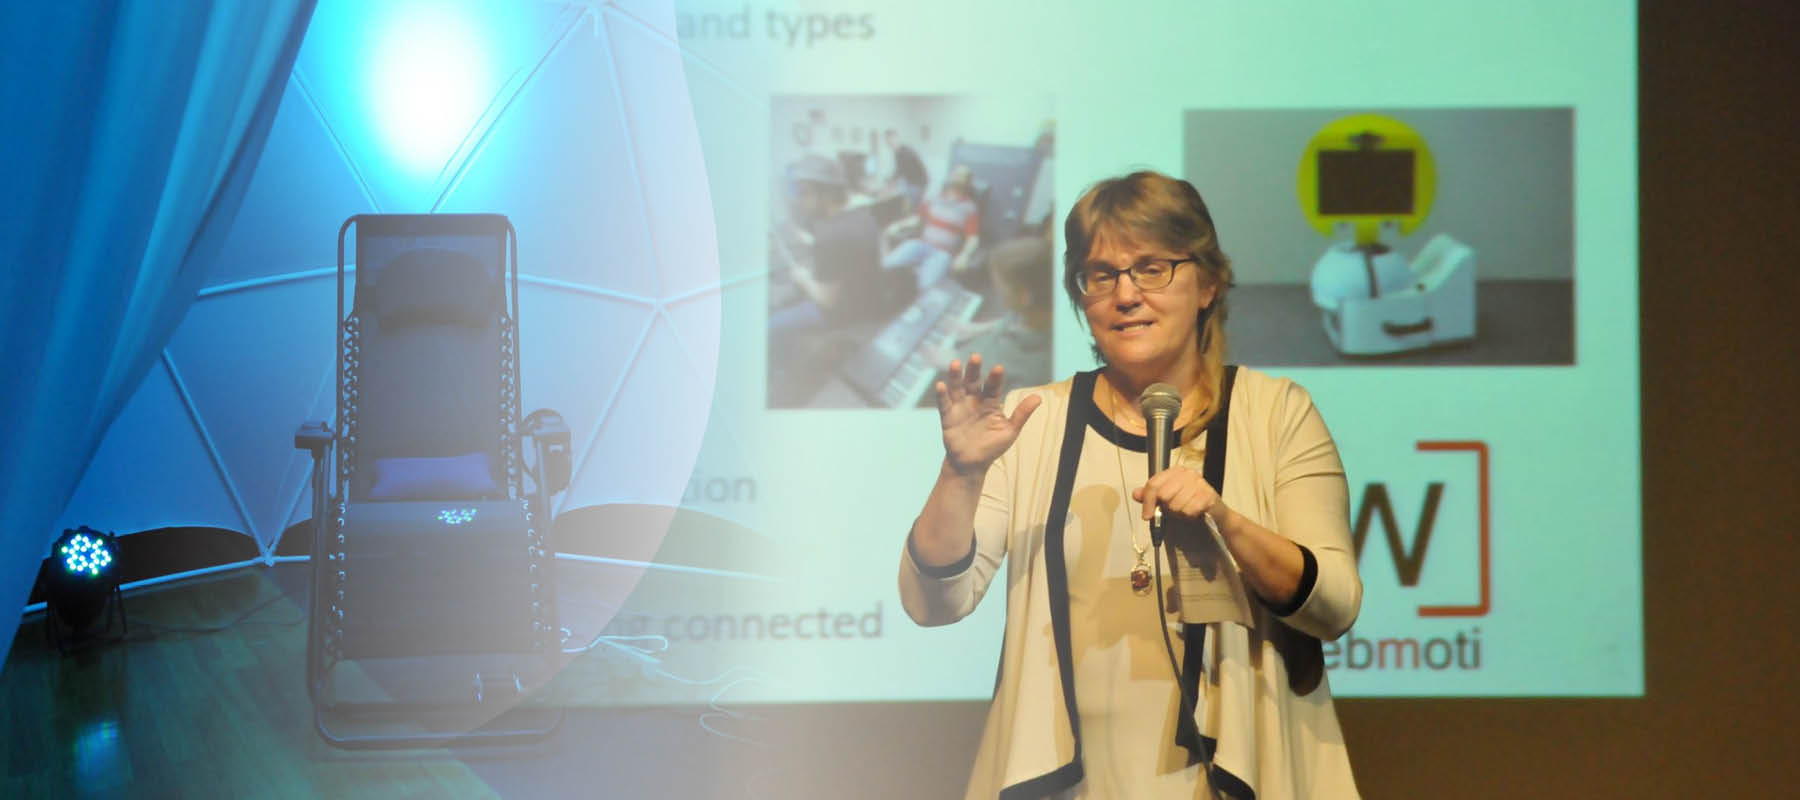 Dr. Fels holds the microphone and presents to the audience at the Sense I.T. Symposium with her slides of a black vibrating chair surrounded in blue light and a yellow circular rotating screen on a desktop with the WebMoti logo under it